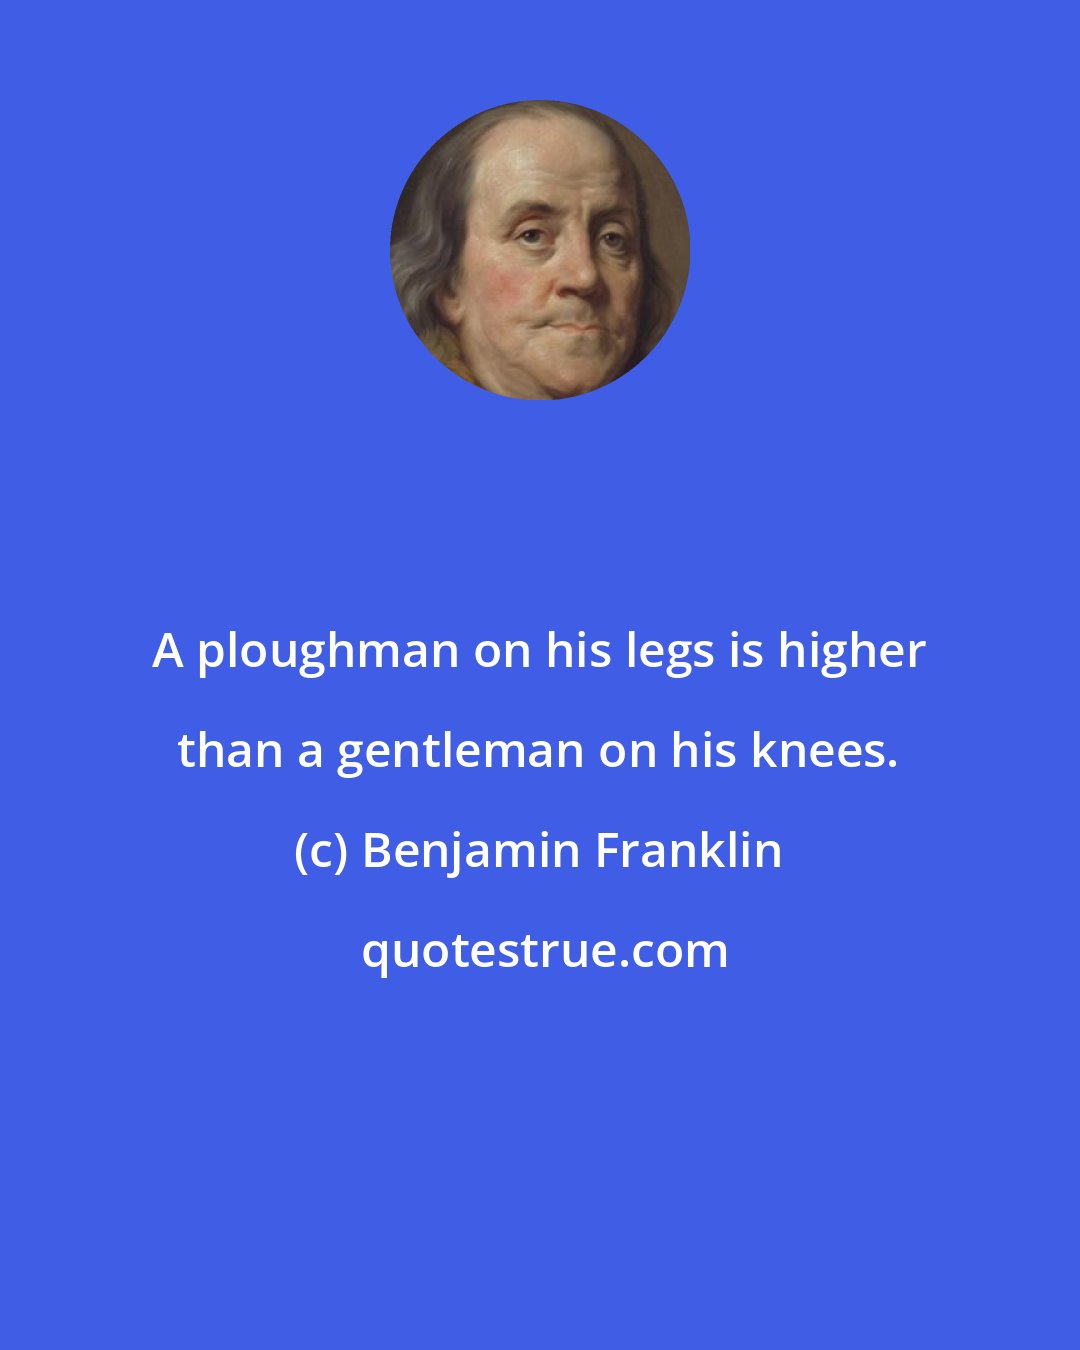 Benjamin Franklin: A ploughman on his legs is higher than a gentleman on his knees.